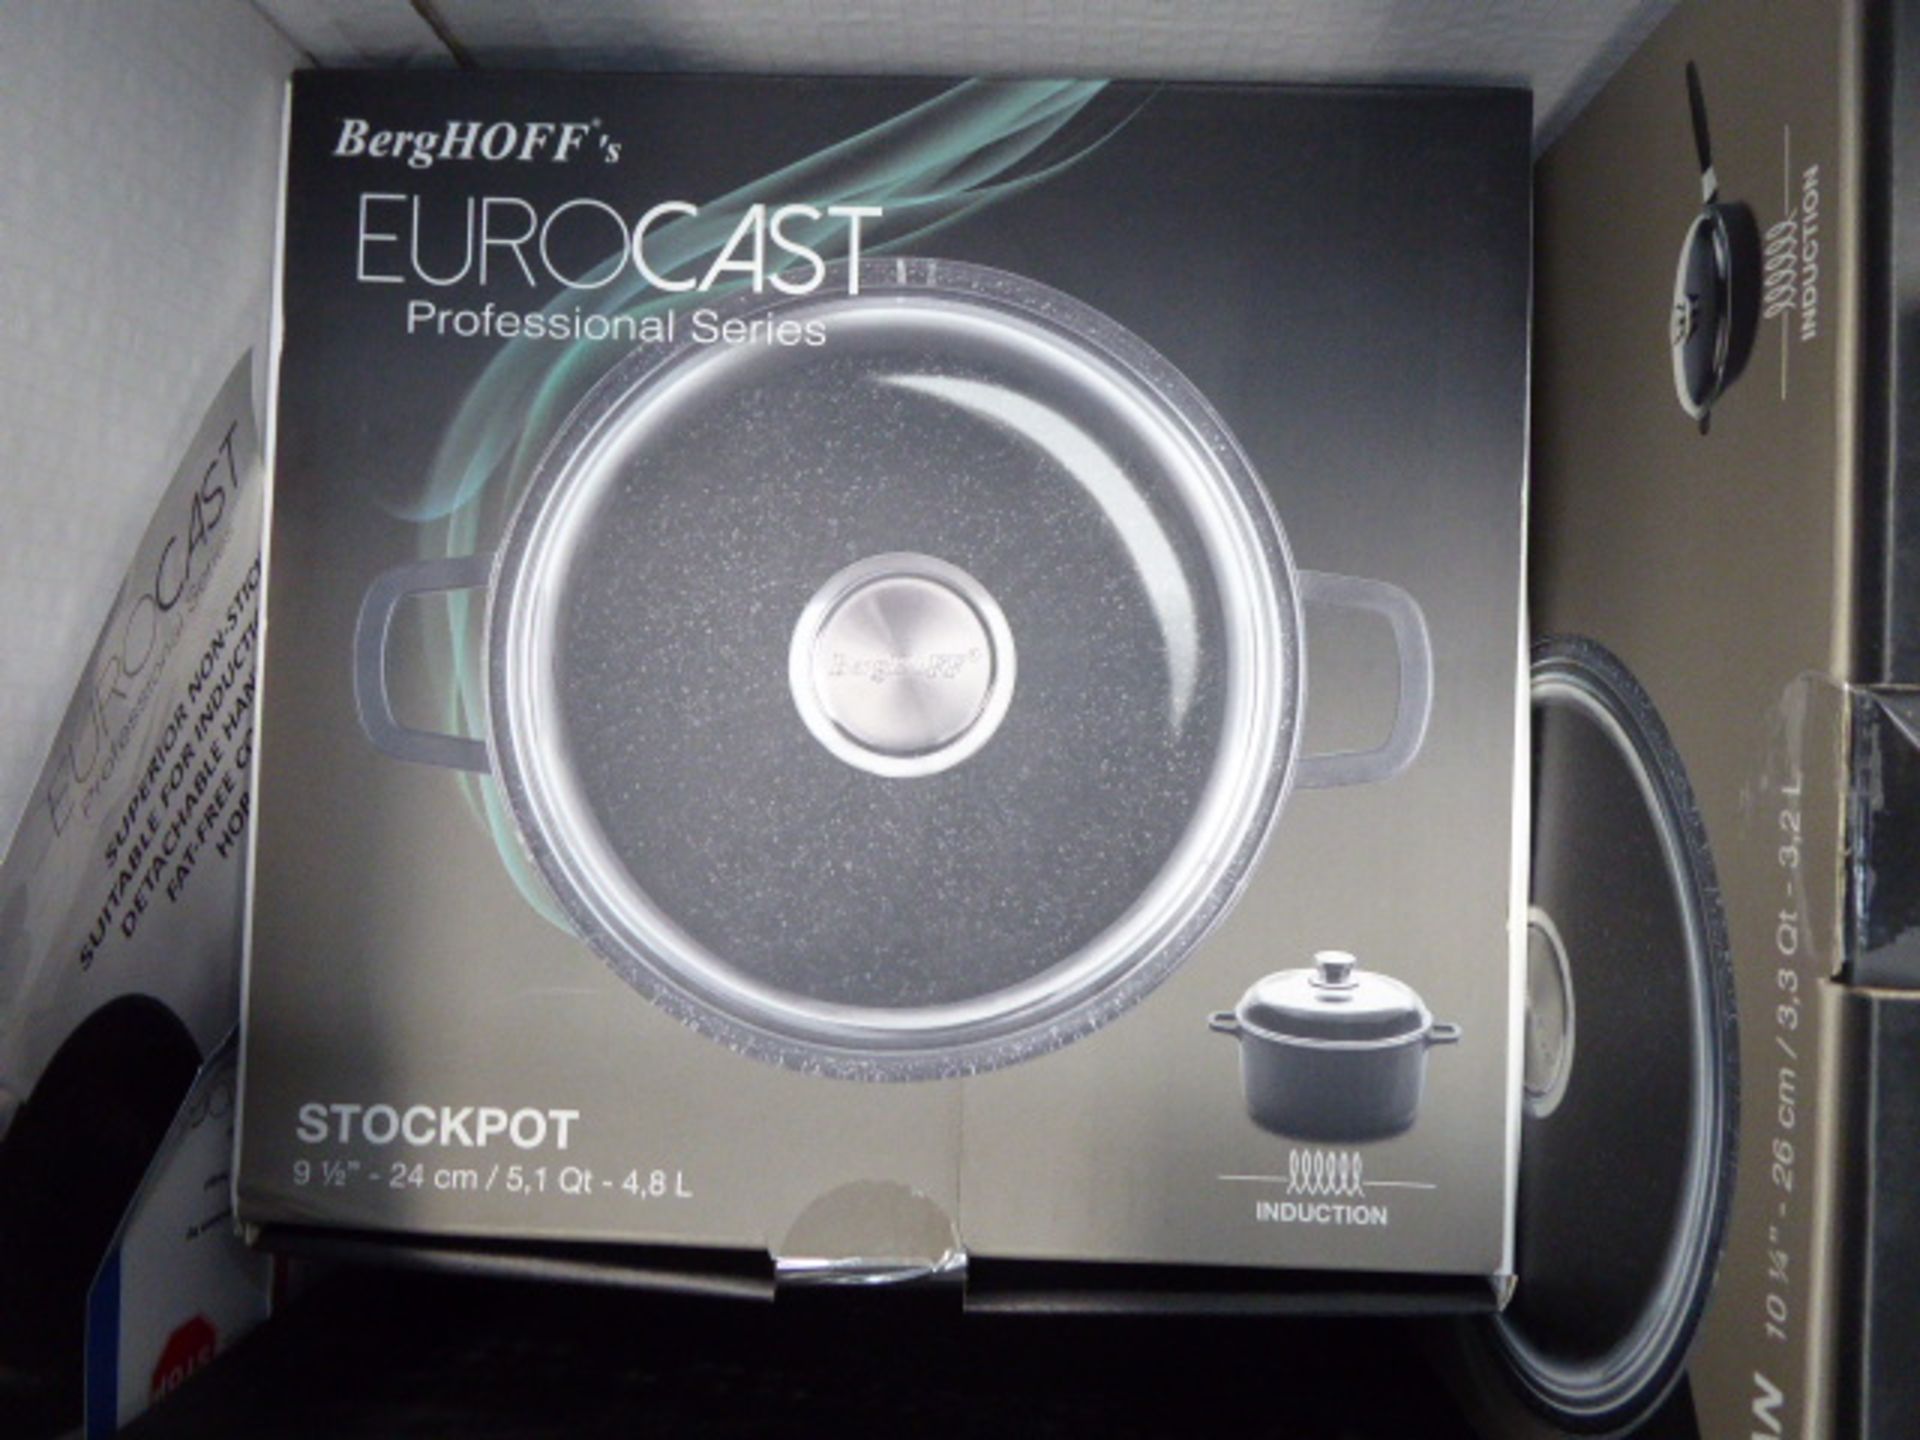 Boxed Eurocast Professional Series cookware set - Image 4 of 4